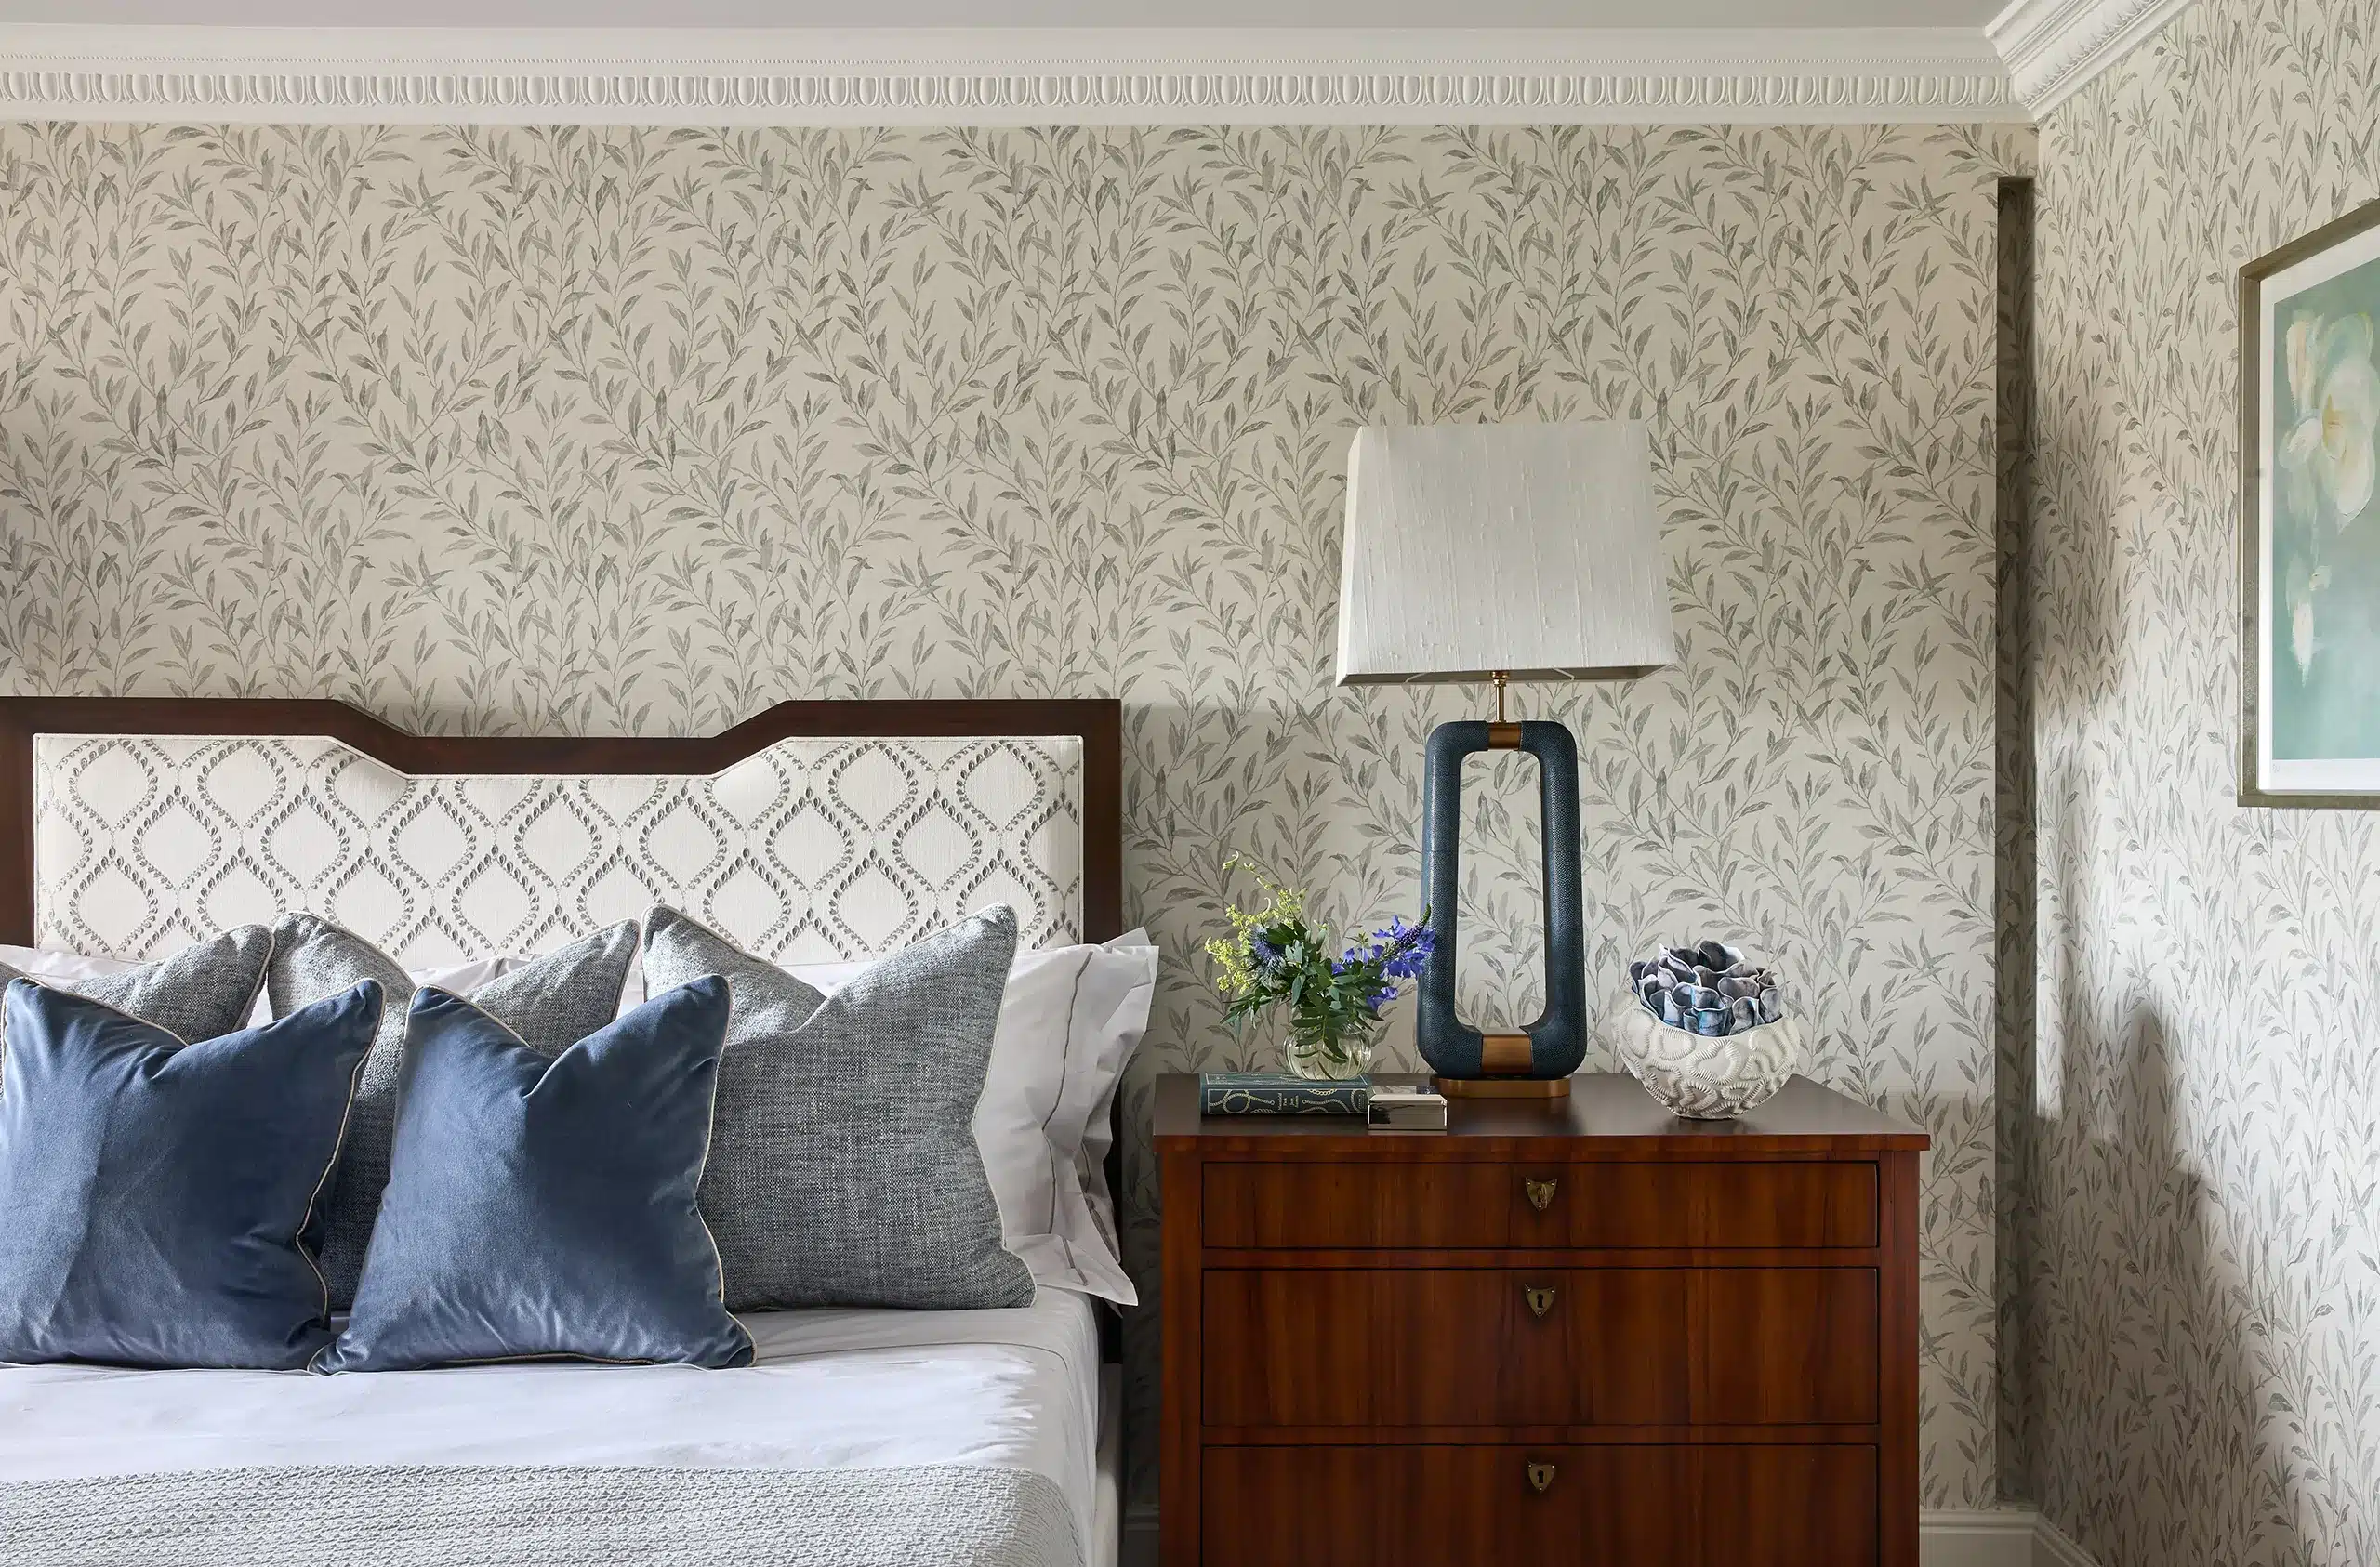 A bedroom at Katharine Pooley's Millbank interior design project in central london, next to westminster